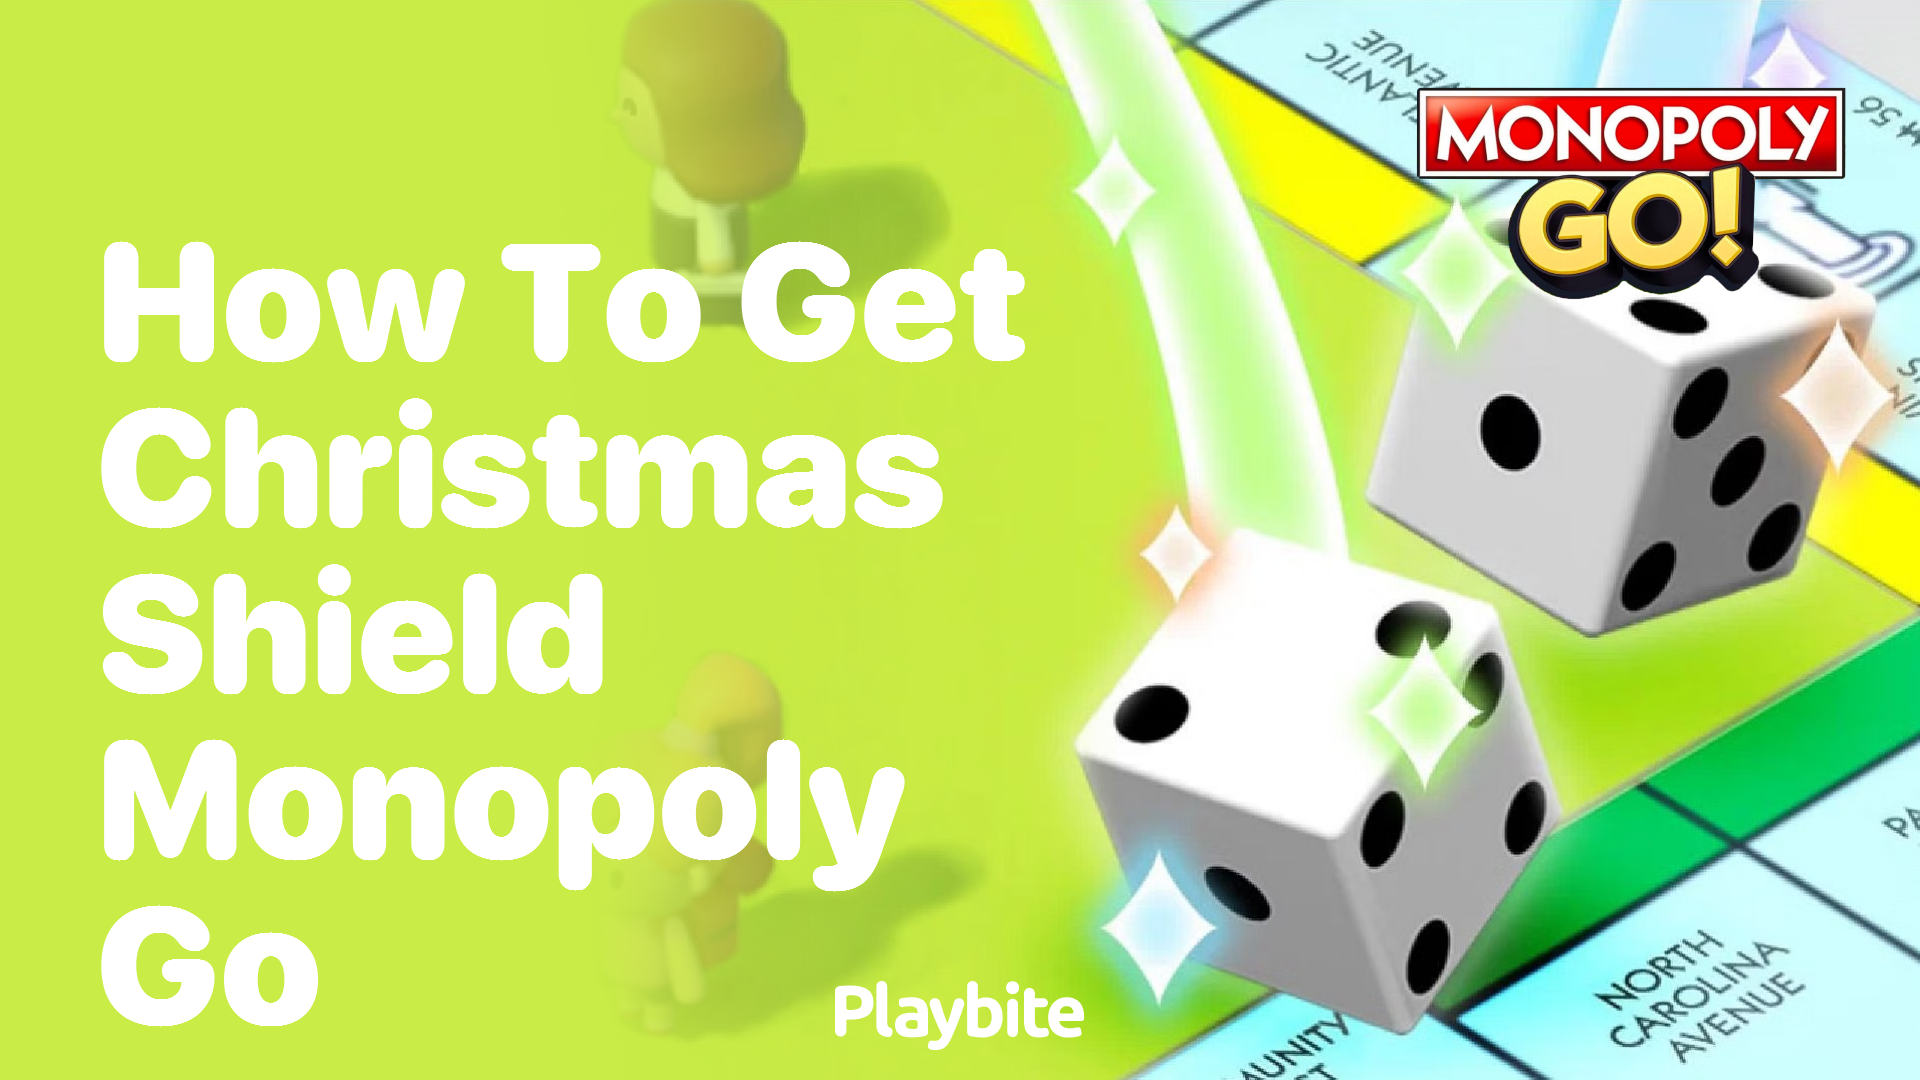 How to Get the Christmas Shield in Monopoly Go